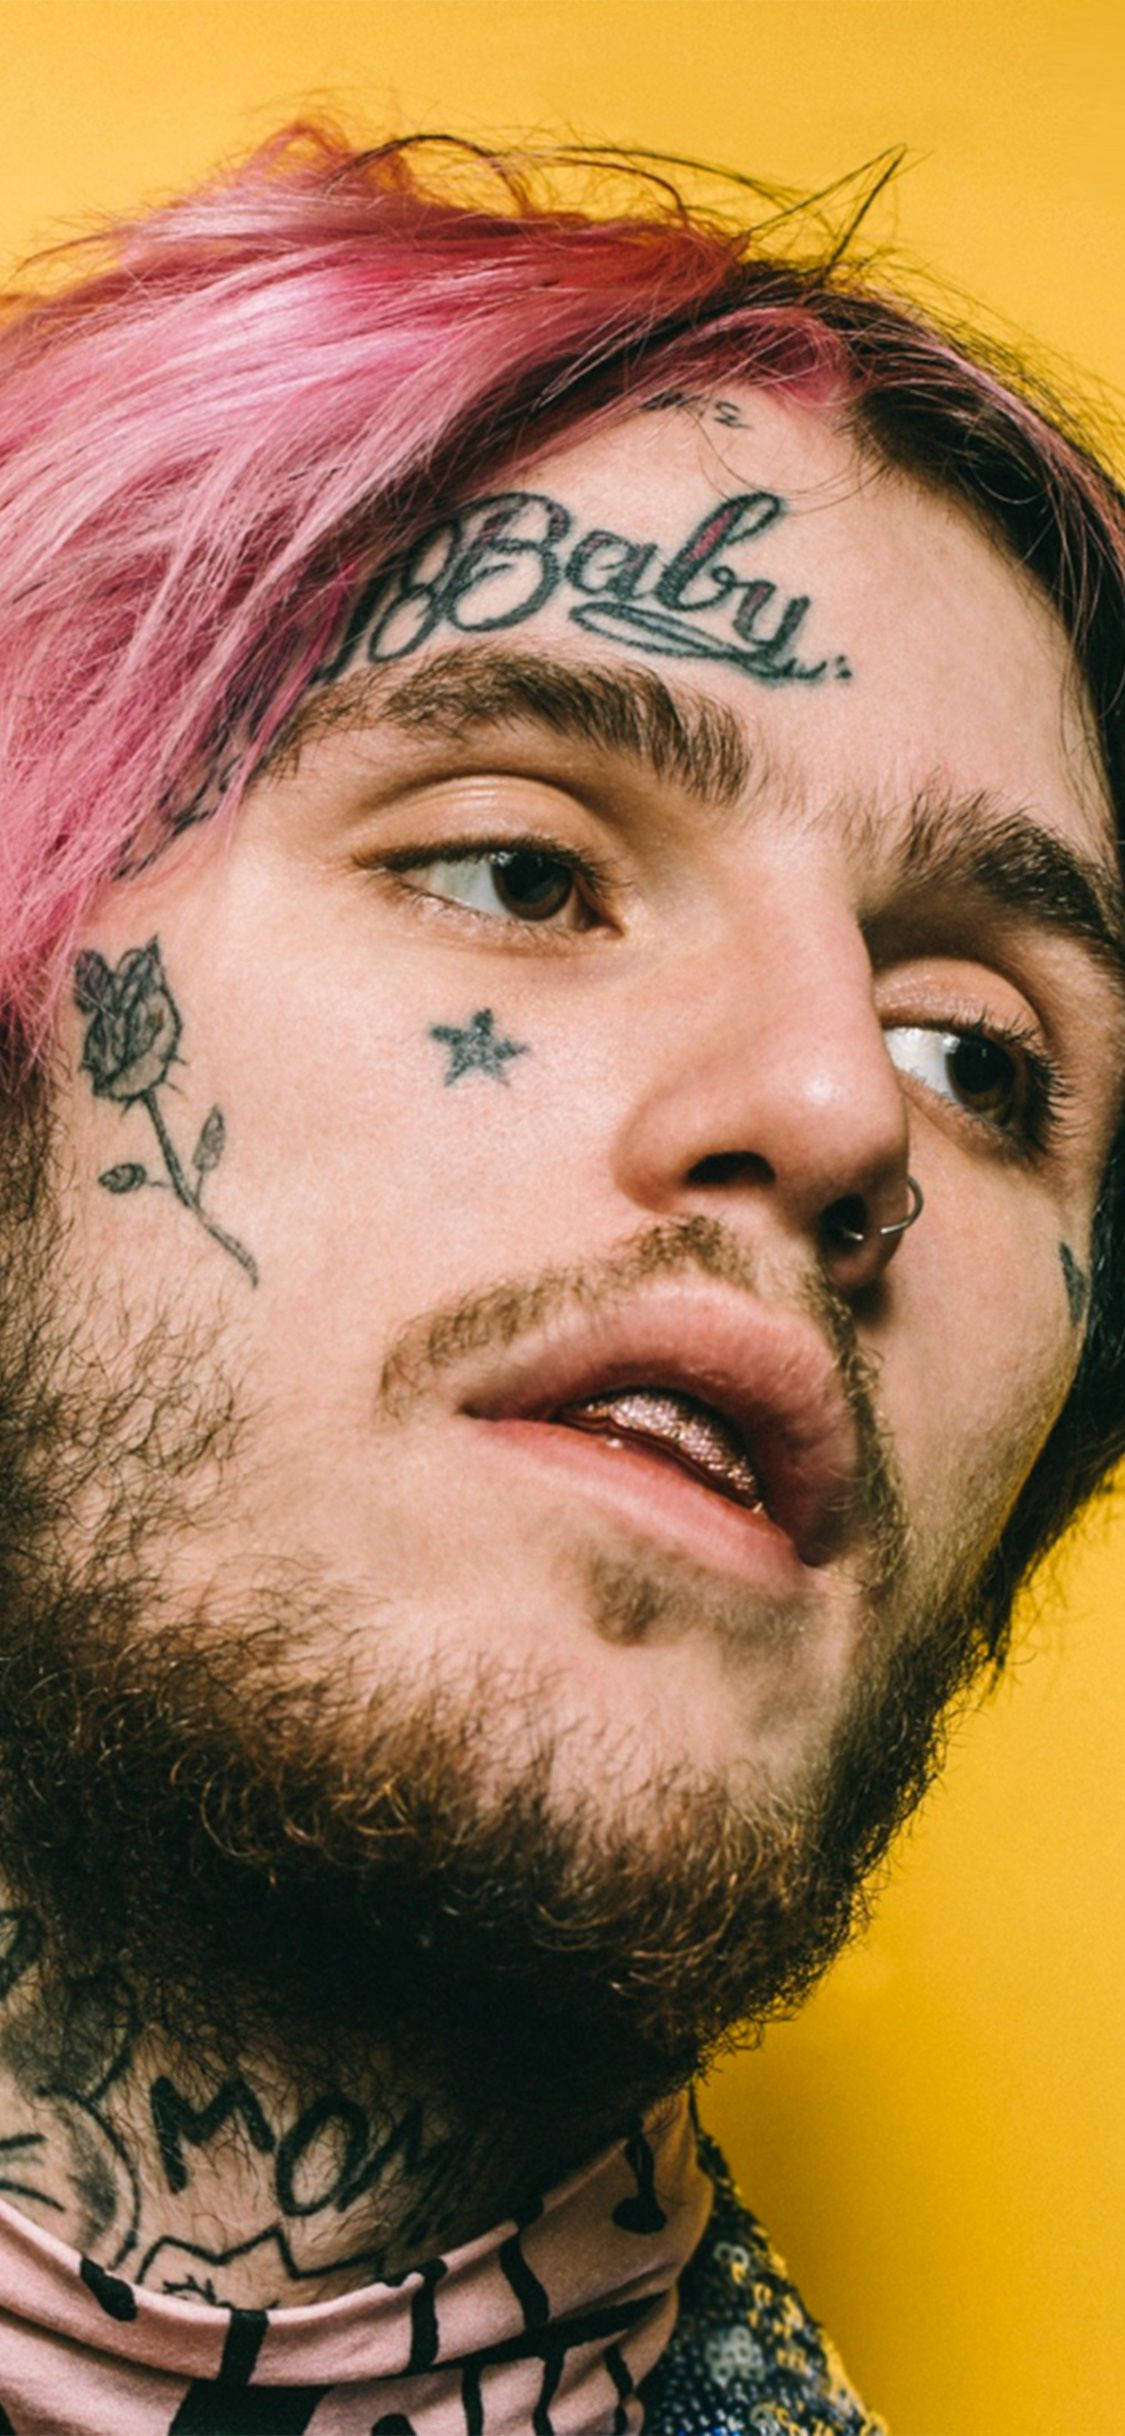 Lil Peep Face Close-up Background